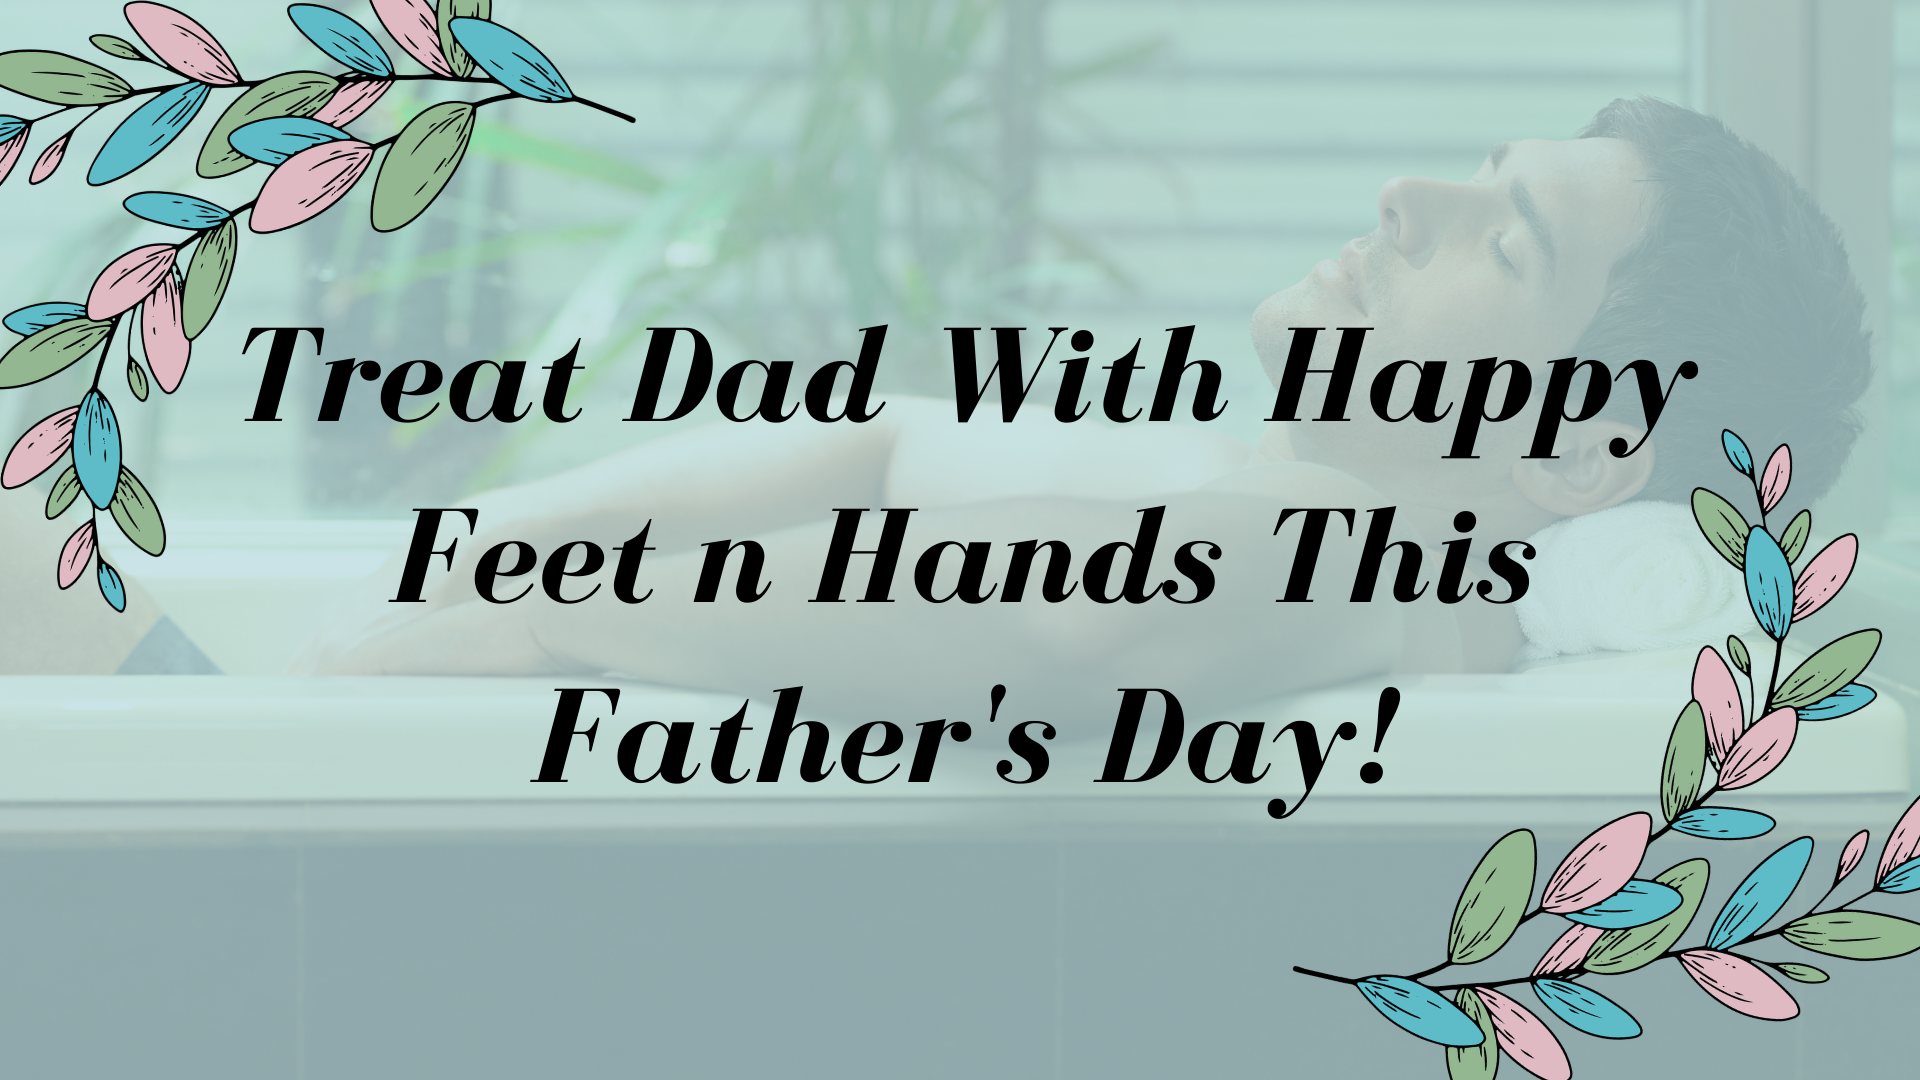 Treat Dad With Happy Feet n Hands This Father's Day!